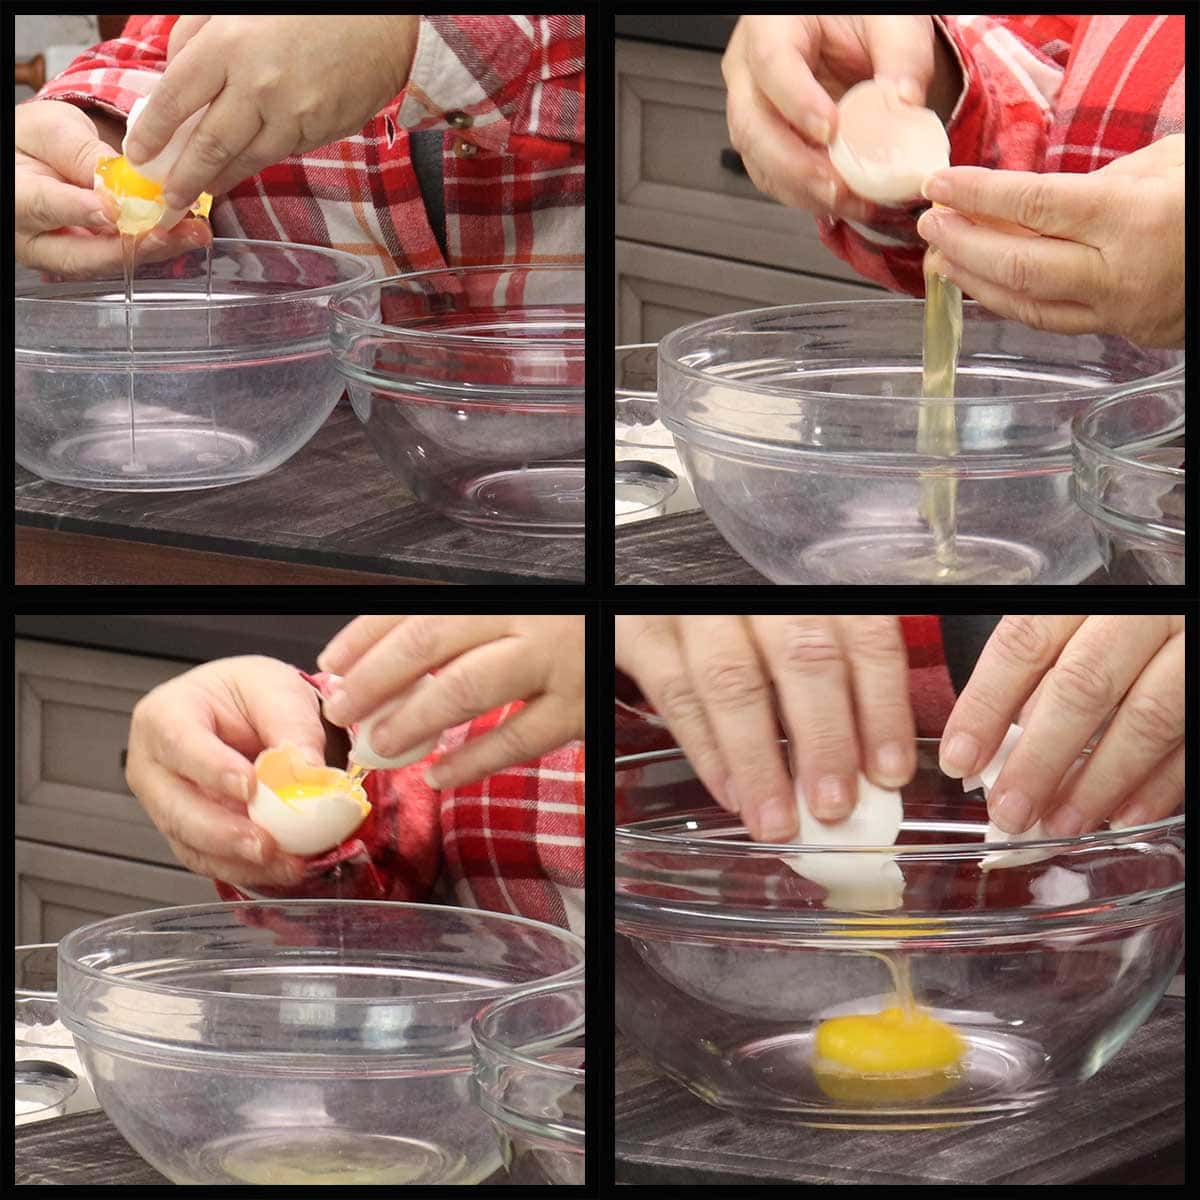 separating the egg into two bowls.